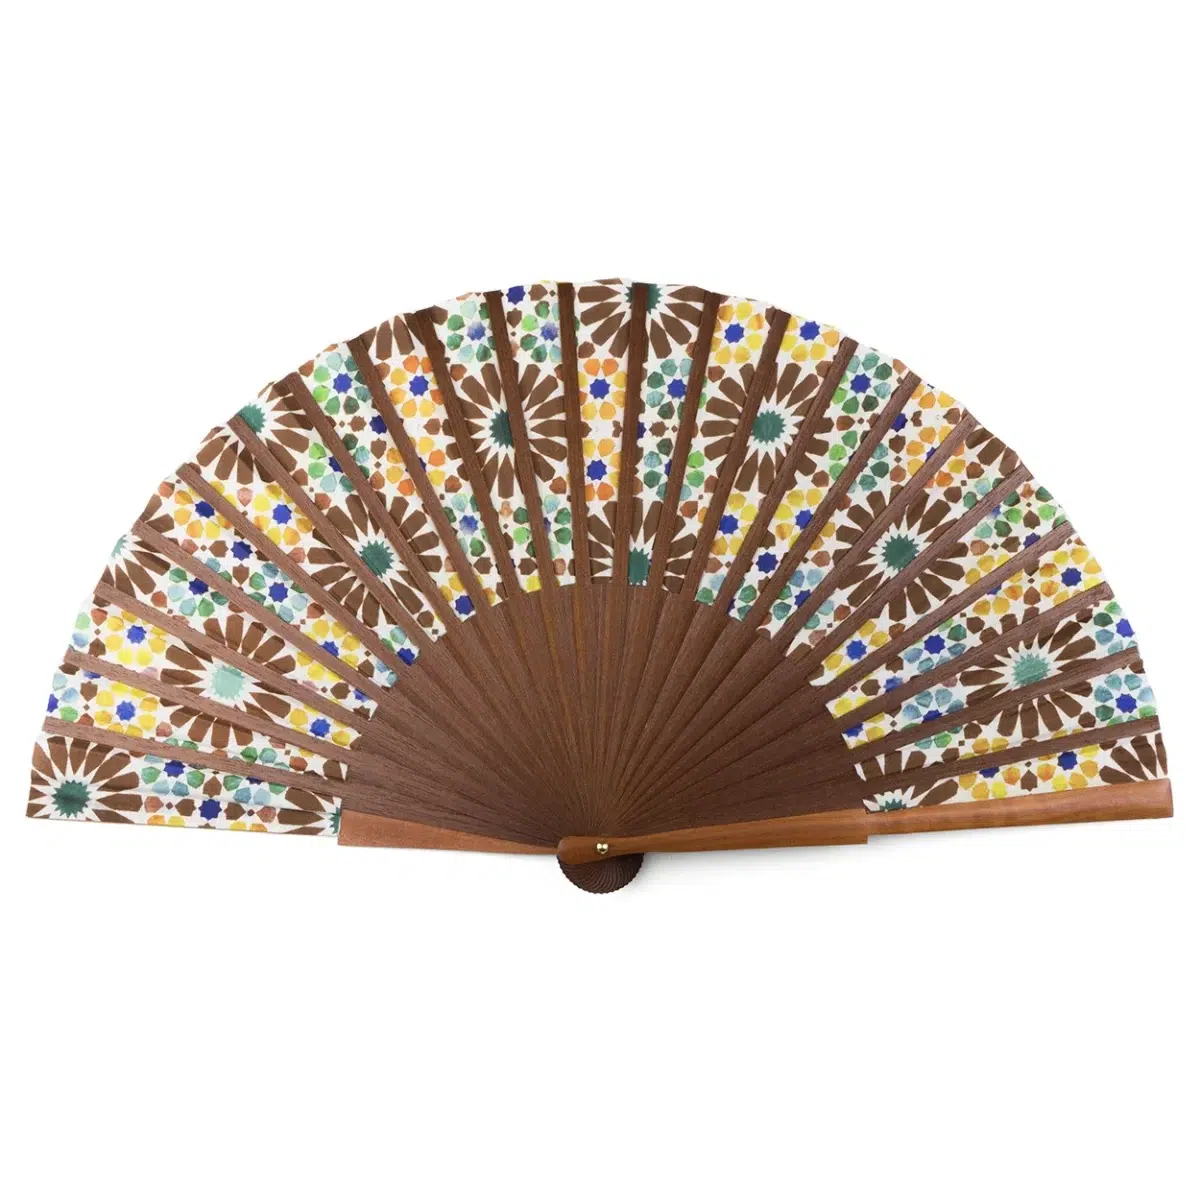 Silk and Wood Fan with Arabesques Inspired by the Islamic Geometry of the Alhambra of Granada.